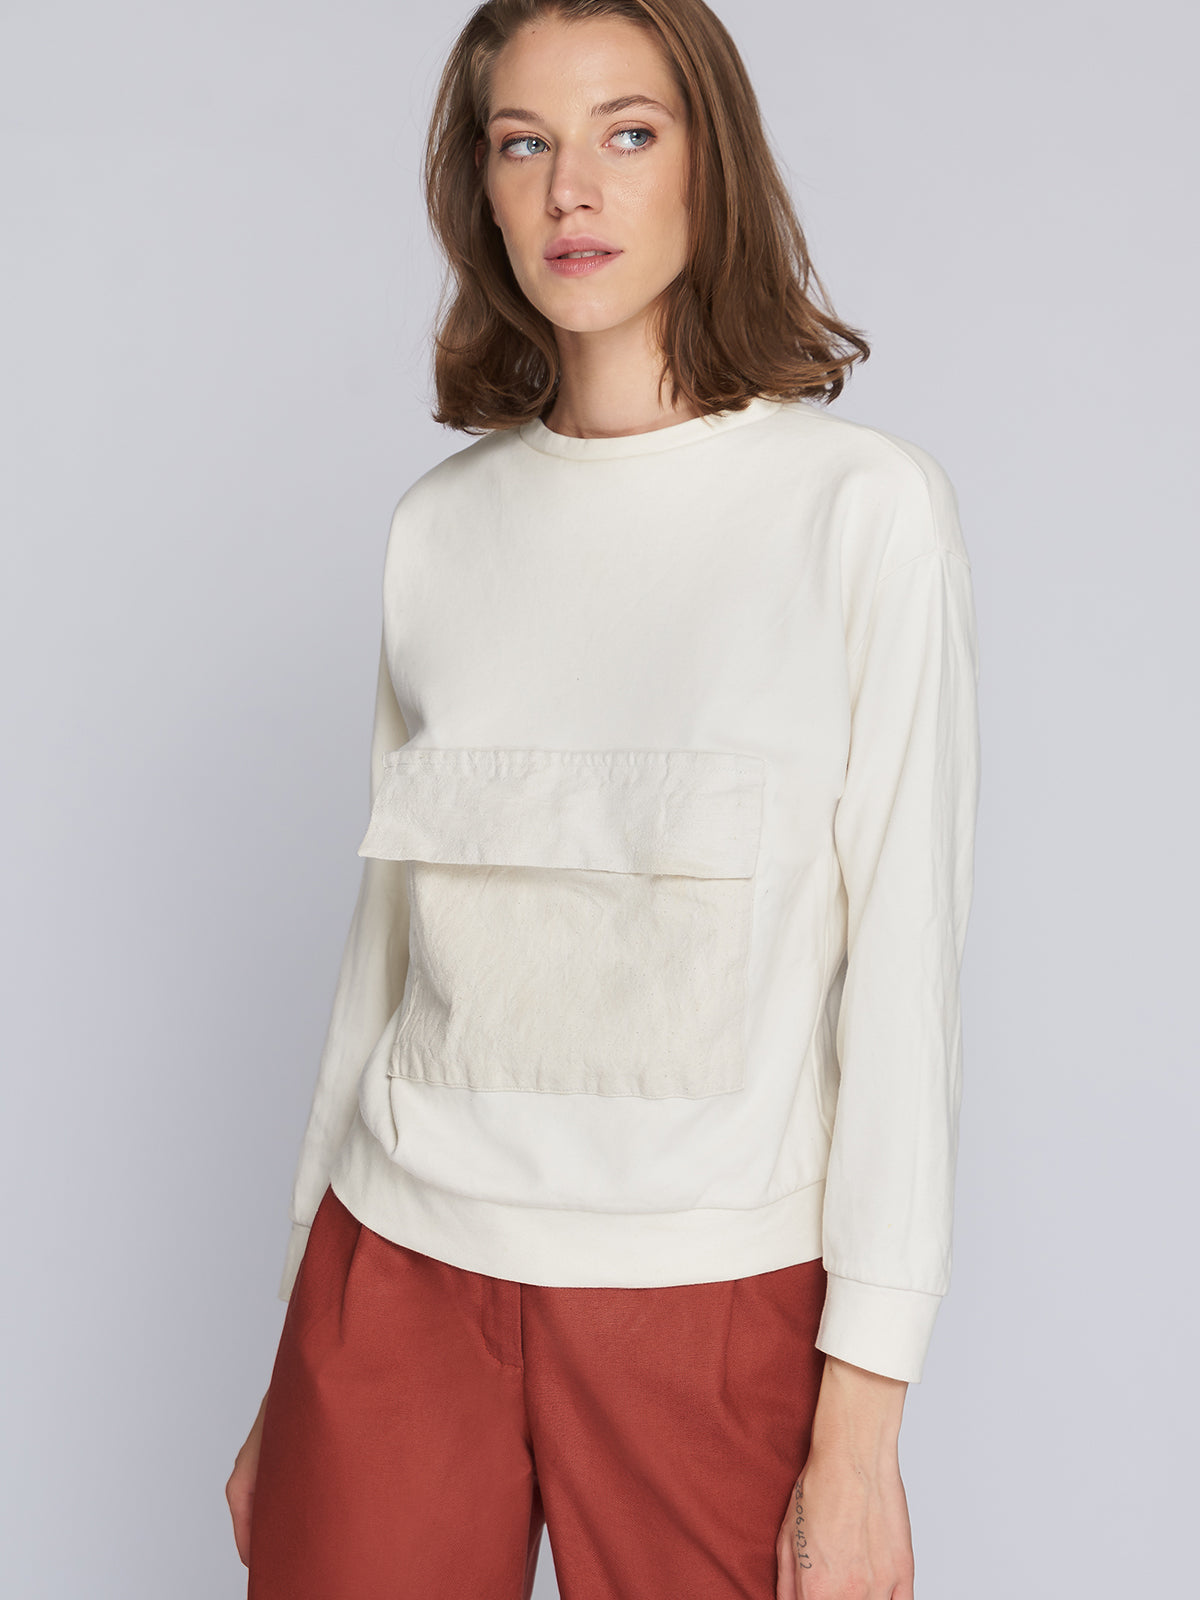 Natural women's sweater with large pockets